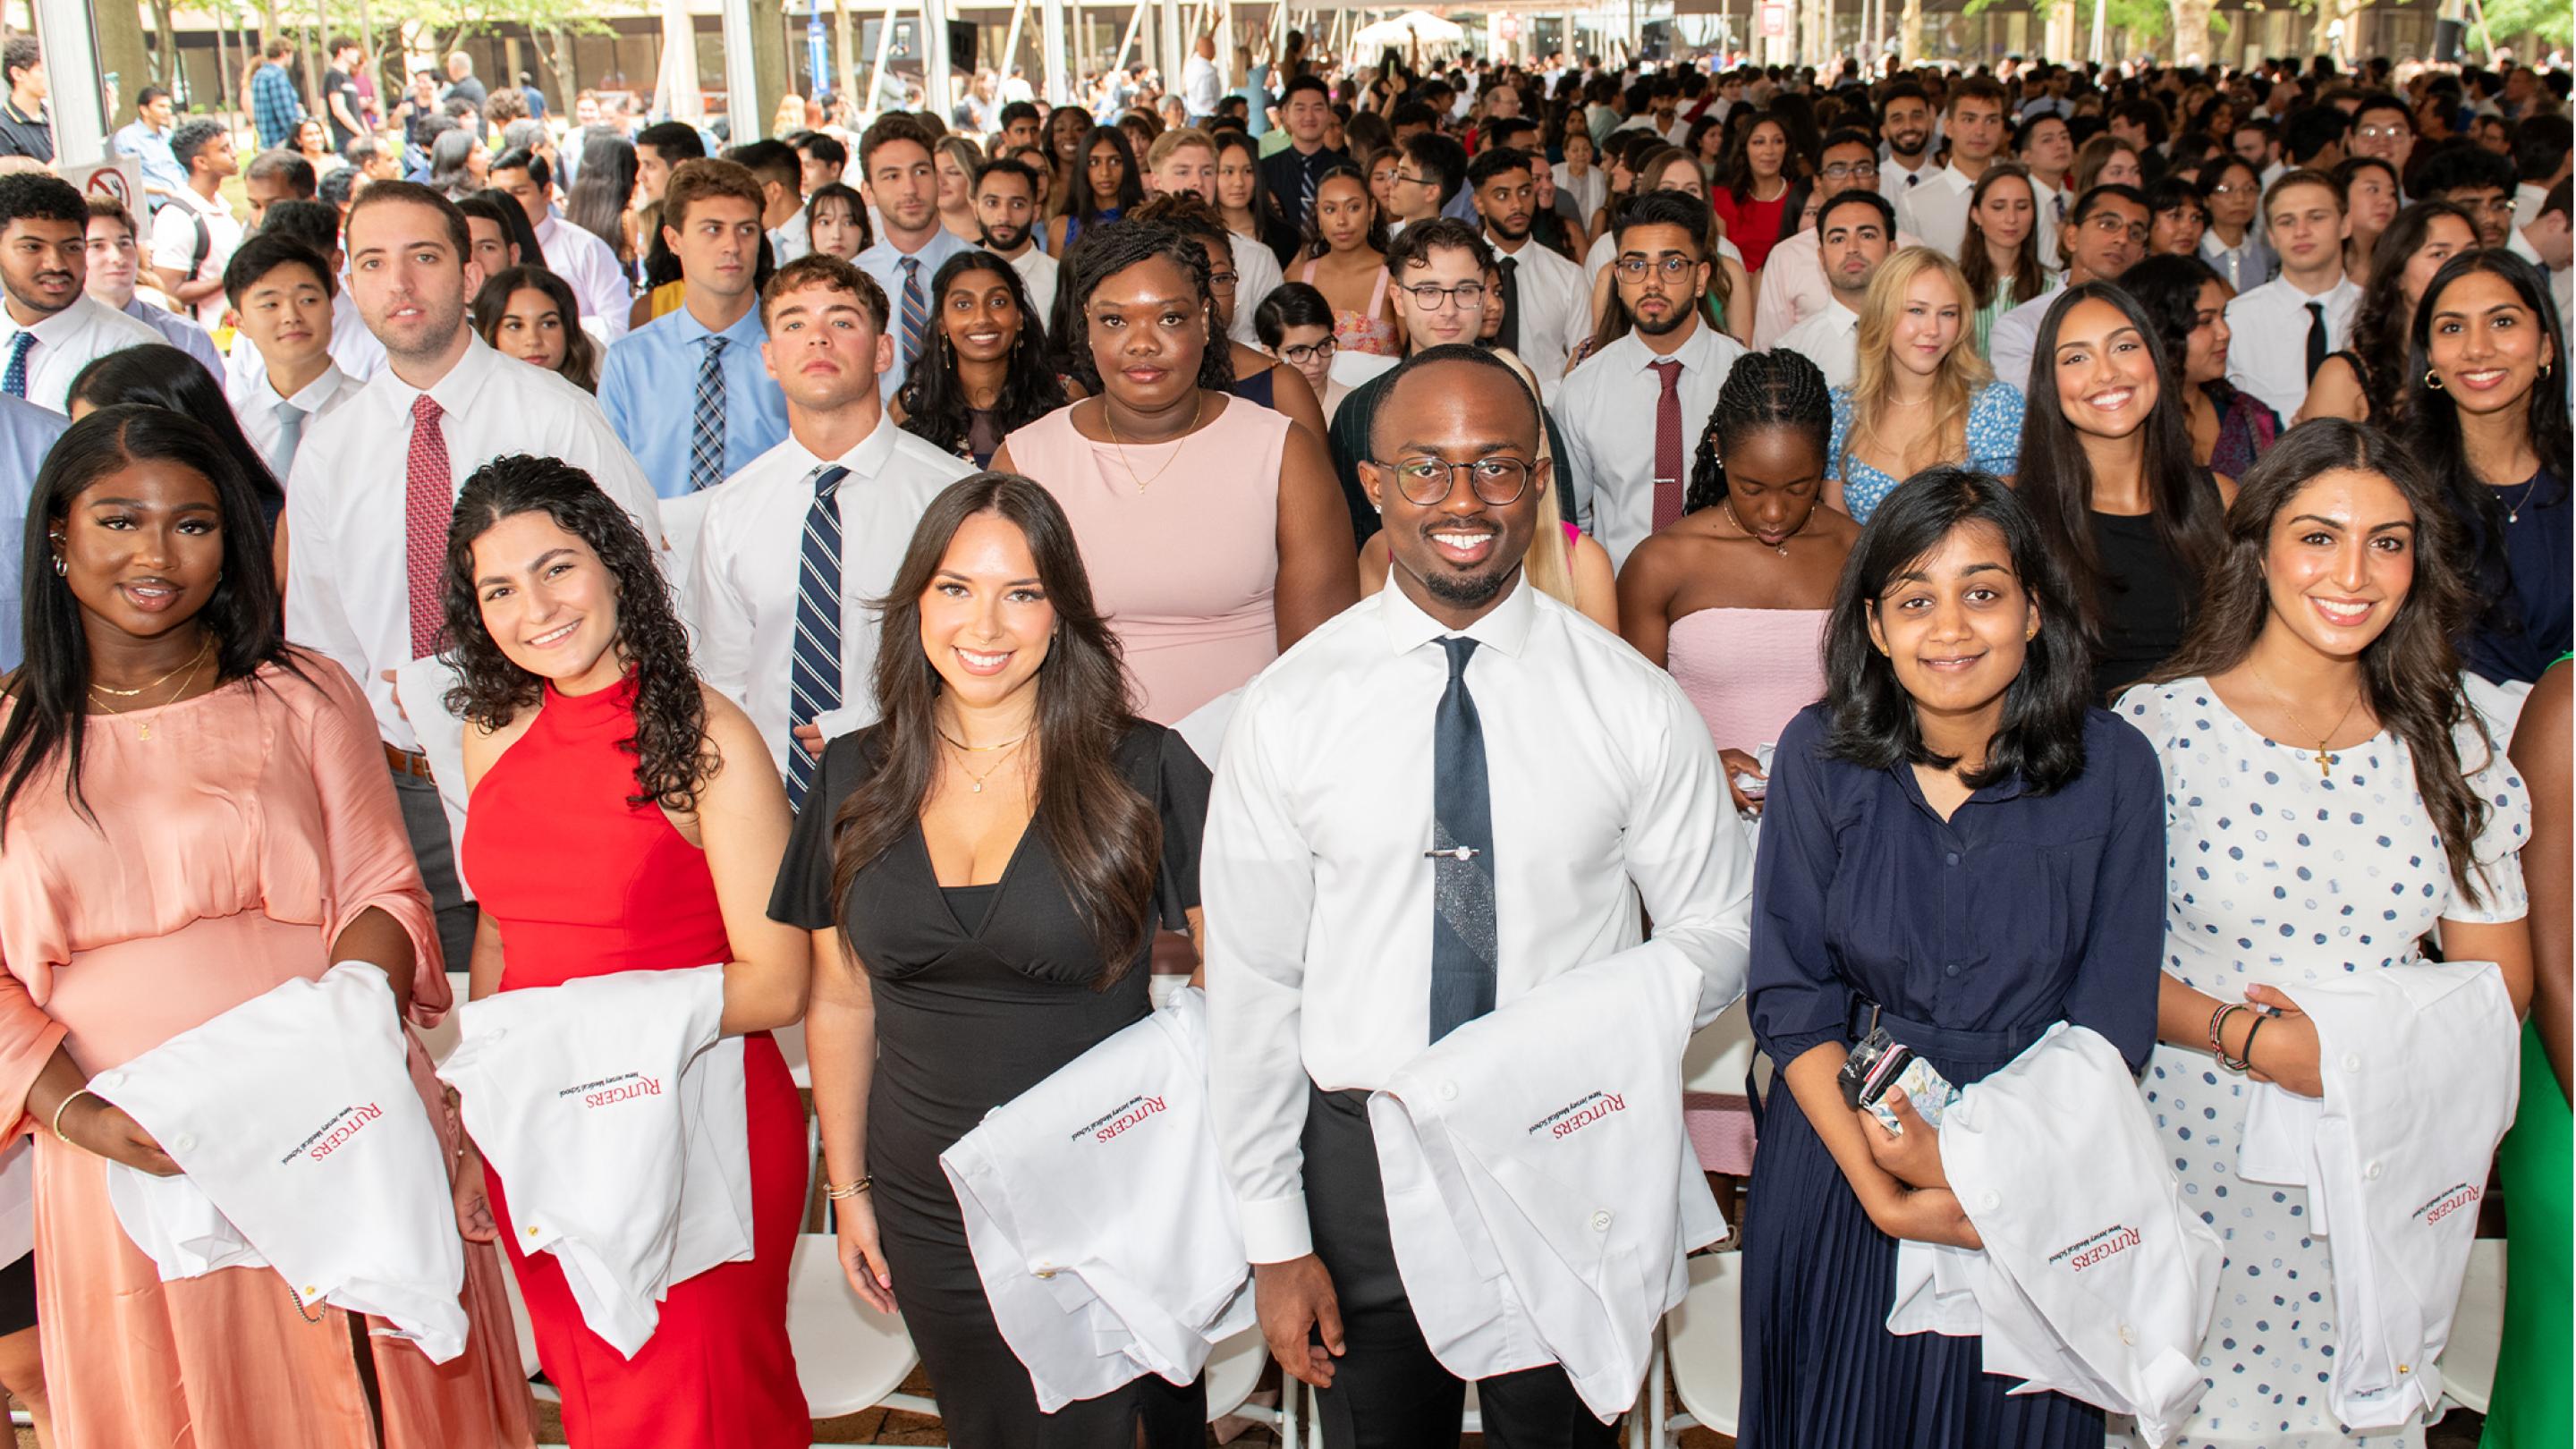 Rutgers New Jersey Medical School Students Celebrate Their Future at